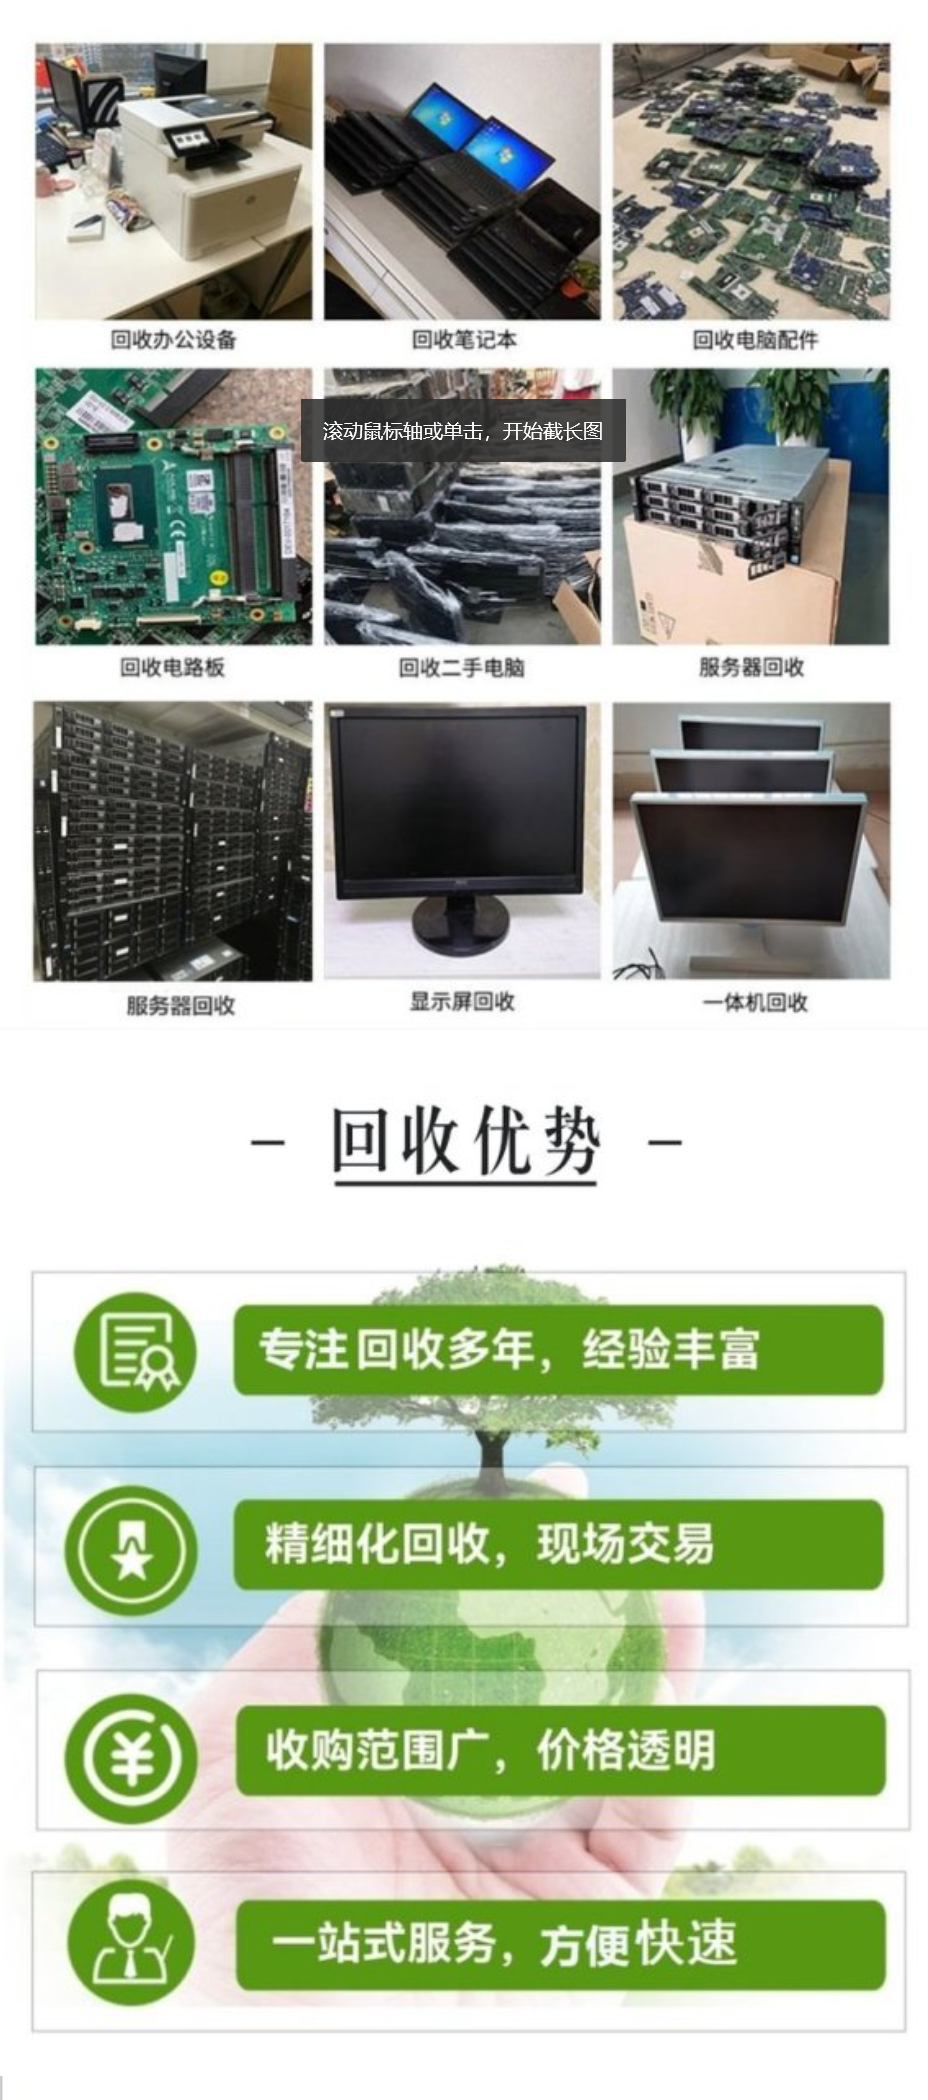 Starting from one day for renting second-hand mobile phones, Apple iPad computers can be rented for short periods without a deposit, and for long periods, the deposit can be as low as 0